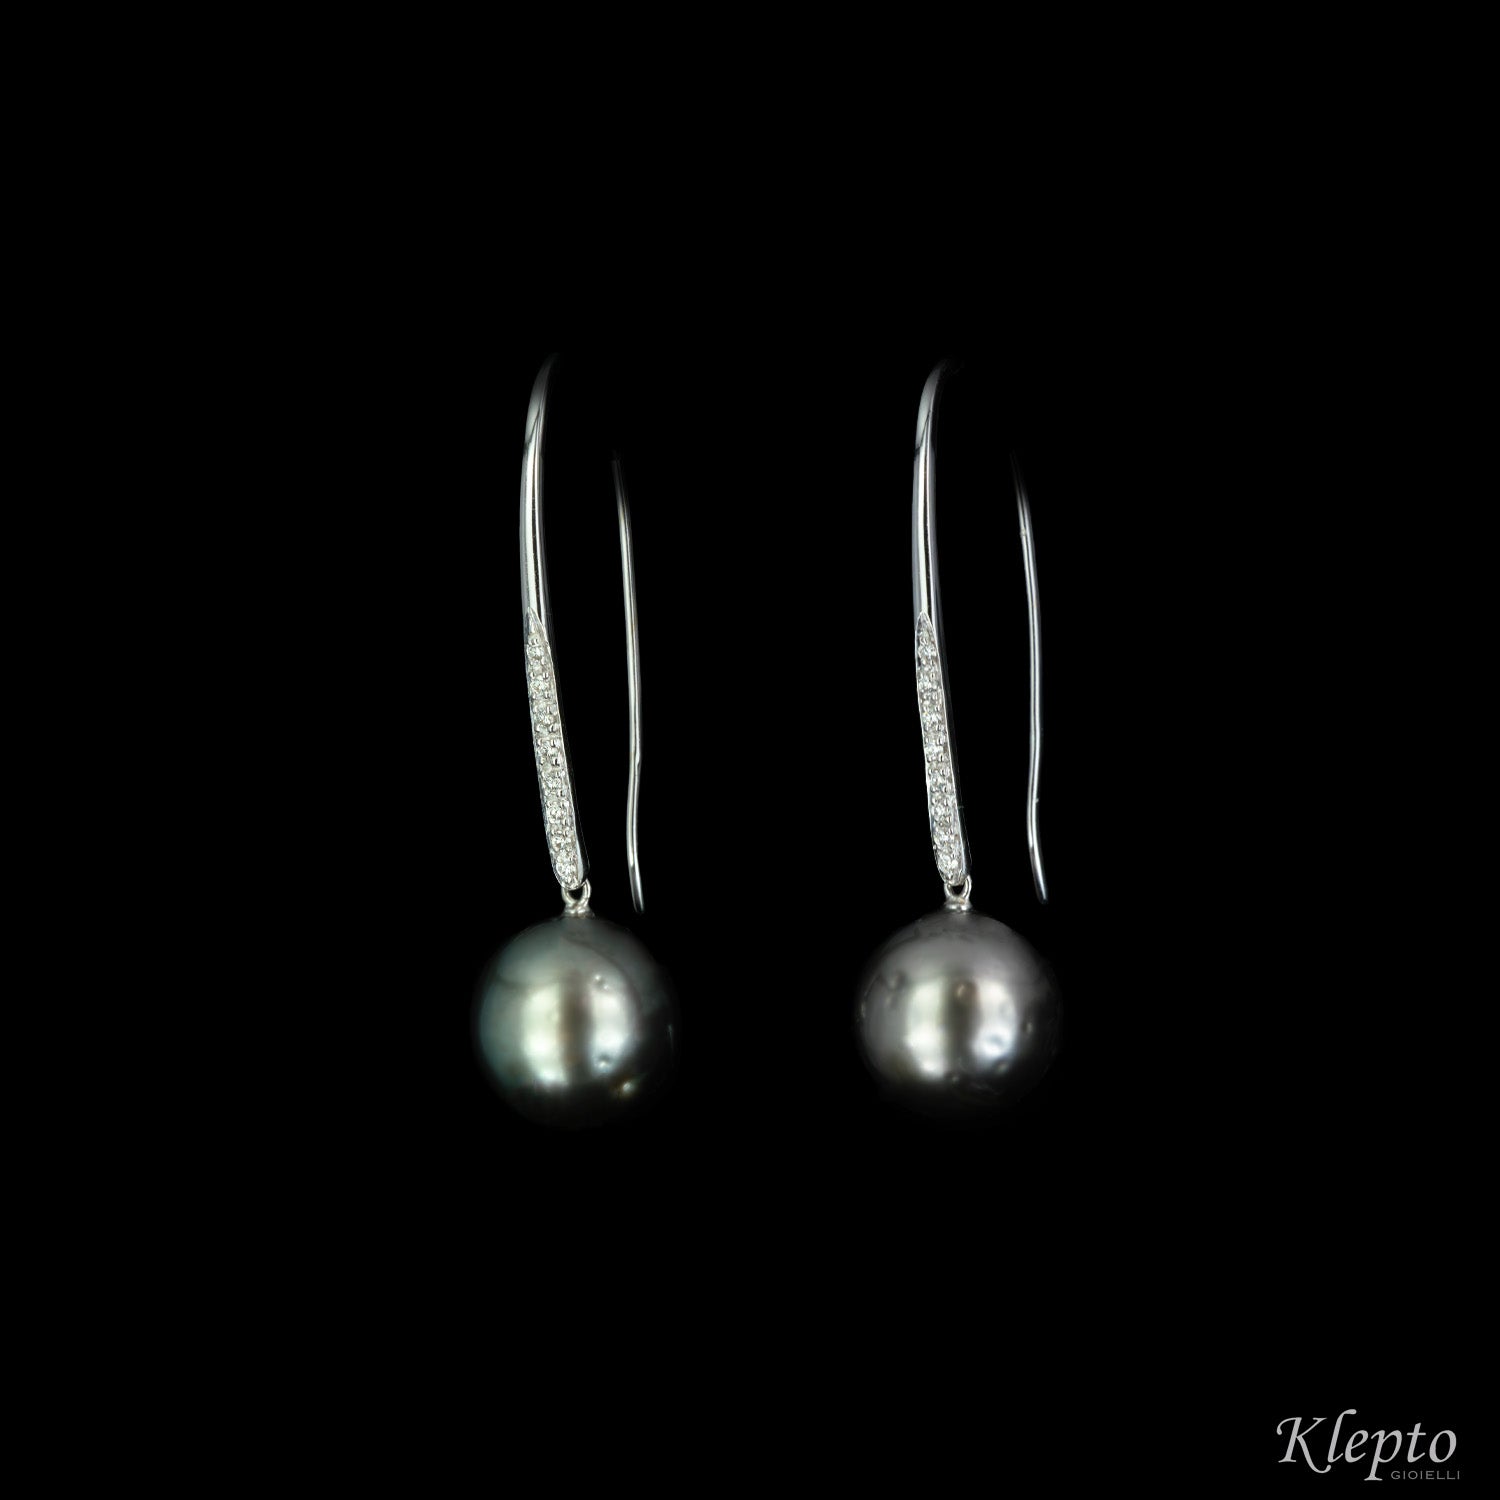 White gold pendant earrings with pearls and diamonds